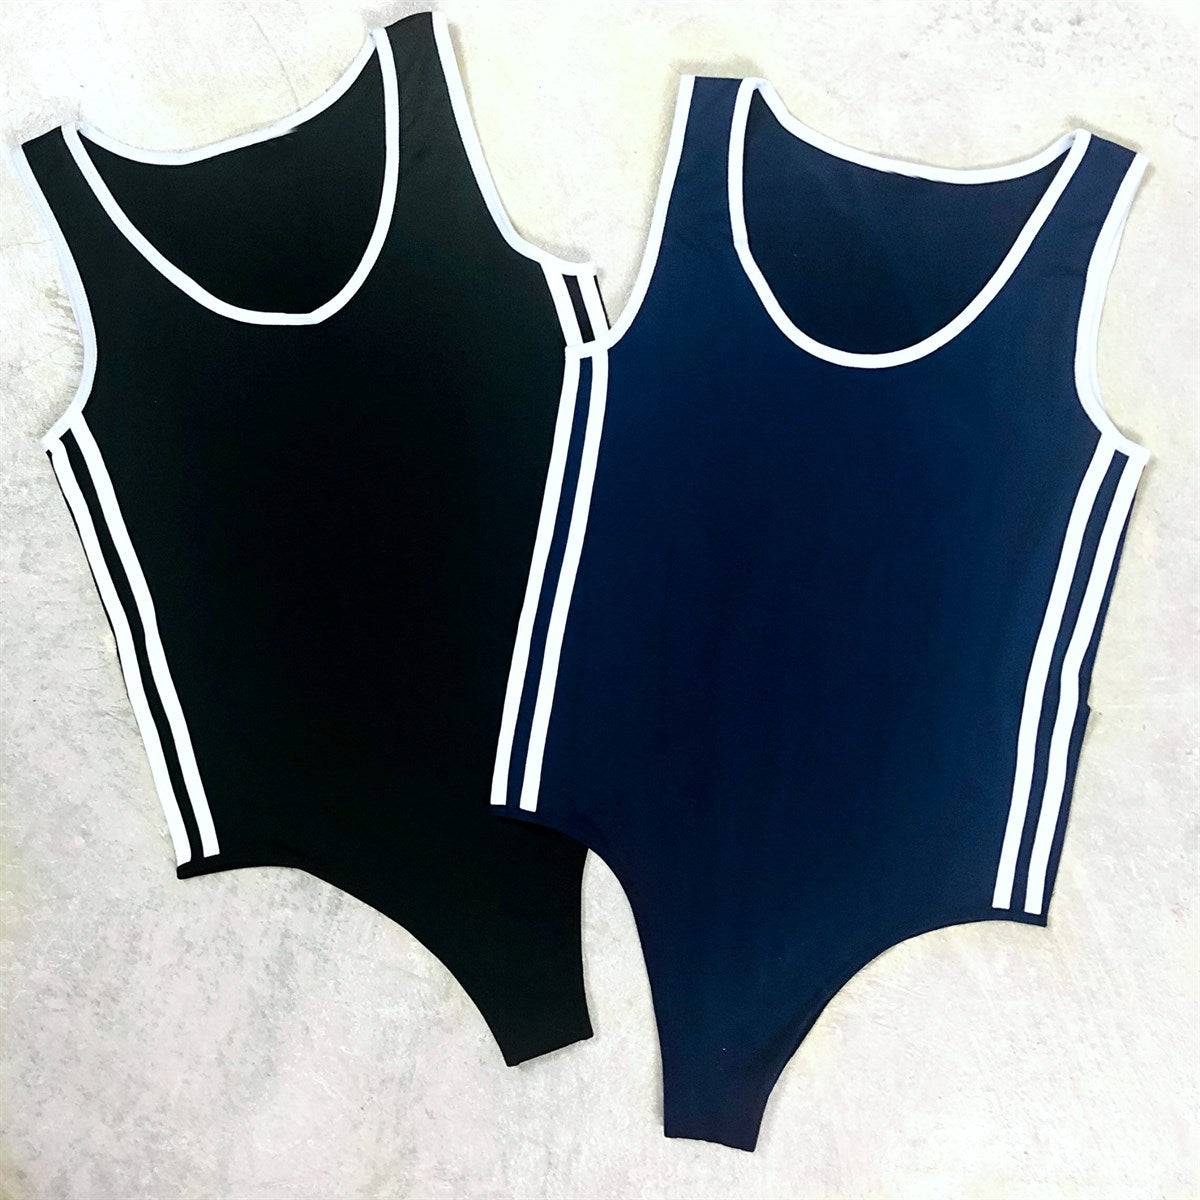 Layering Body Suits